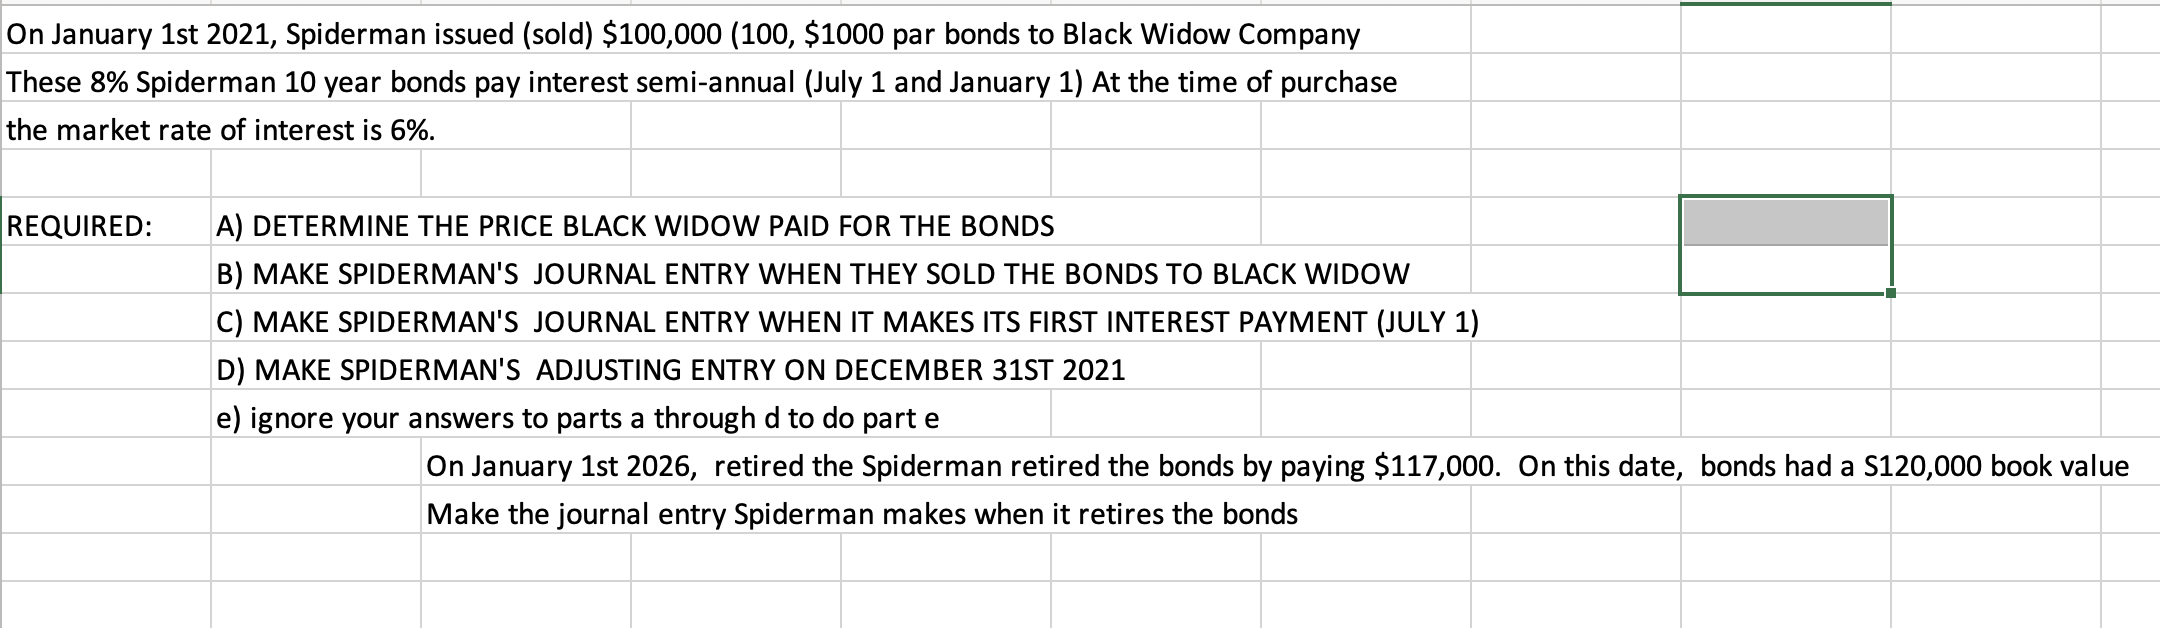 On January 1st 2021, Spiderman issued (sold) $100,000 (100, $1000 par bonds to Black Widow CompanyThese 8% Spiderman 10 year